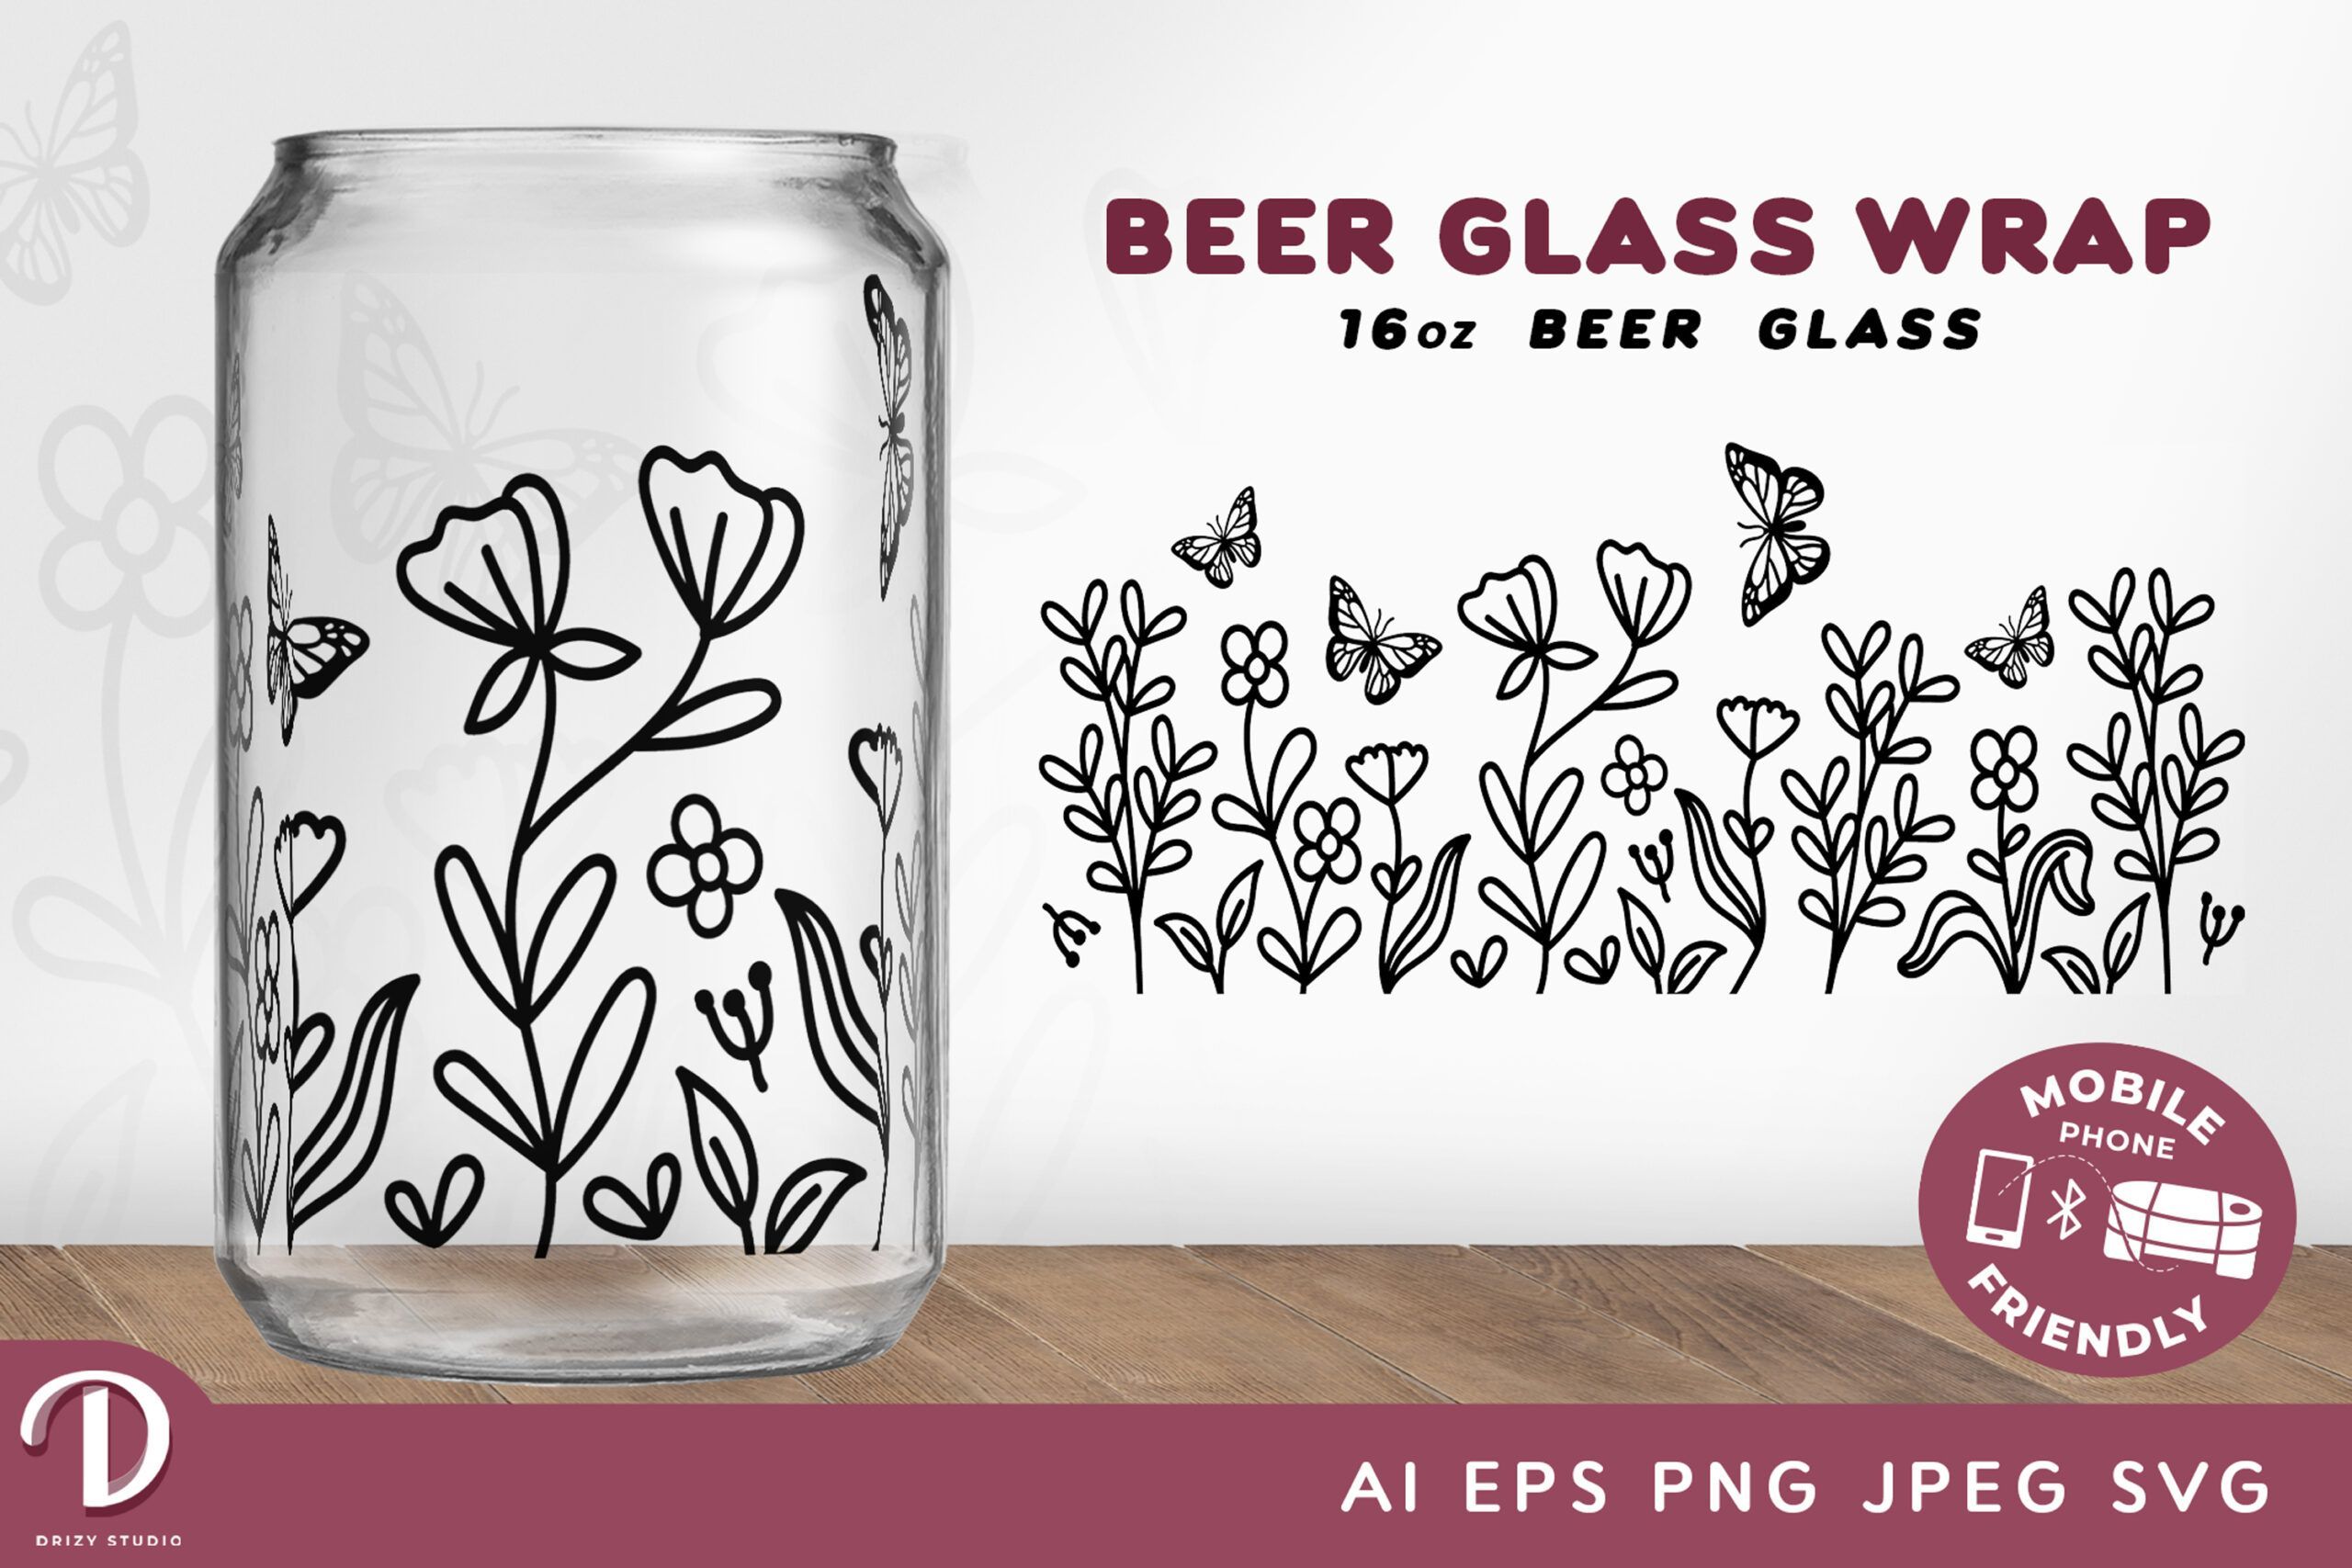 Beautiful Wildflower SVG with Butterfly 16oz Libbey Glass Can Wrap